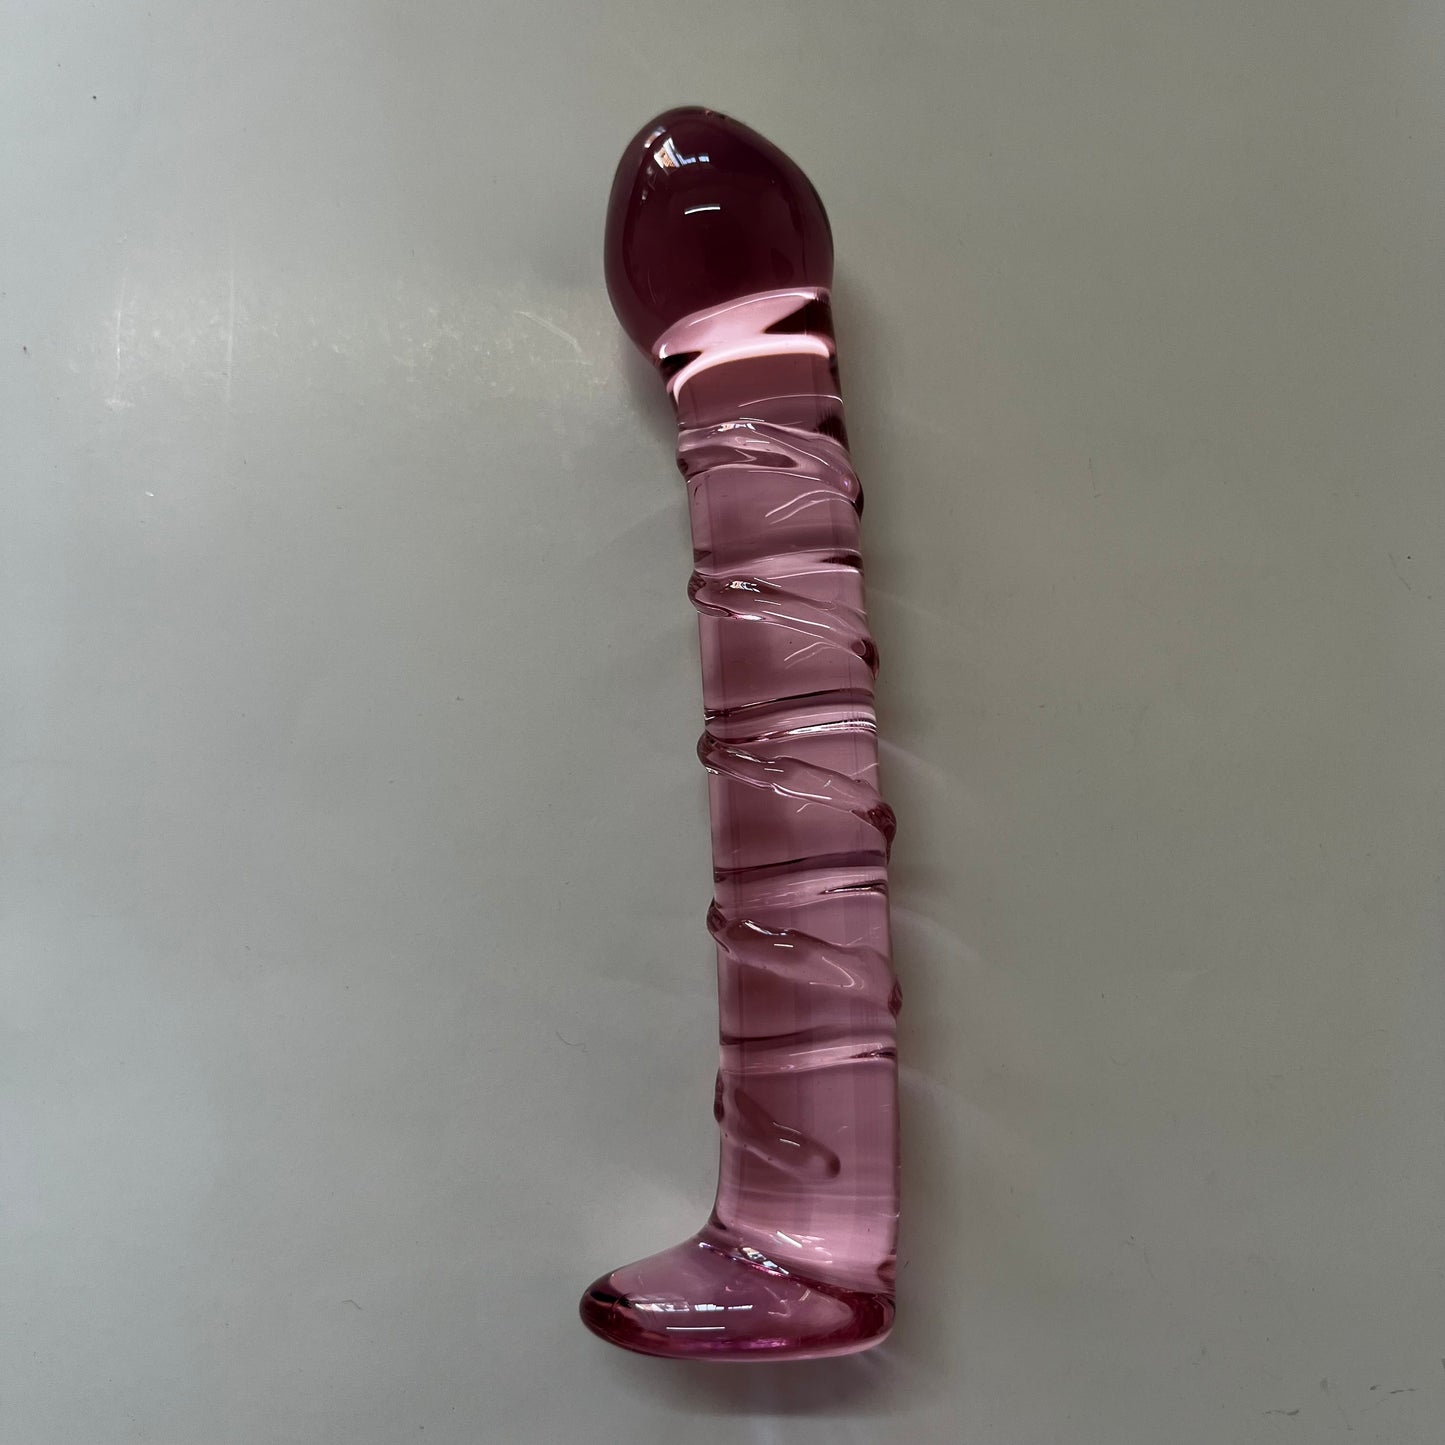 GLASS DILDO CLEAR PINK